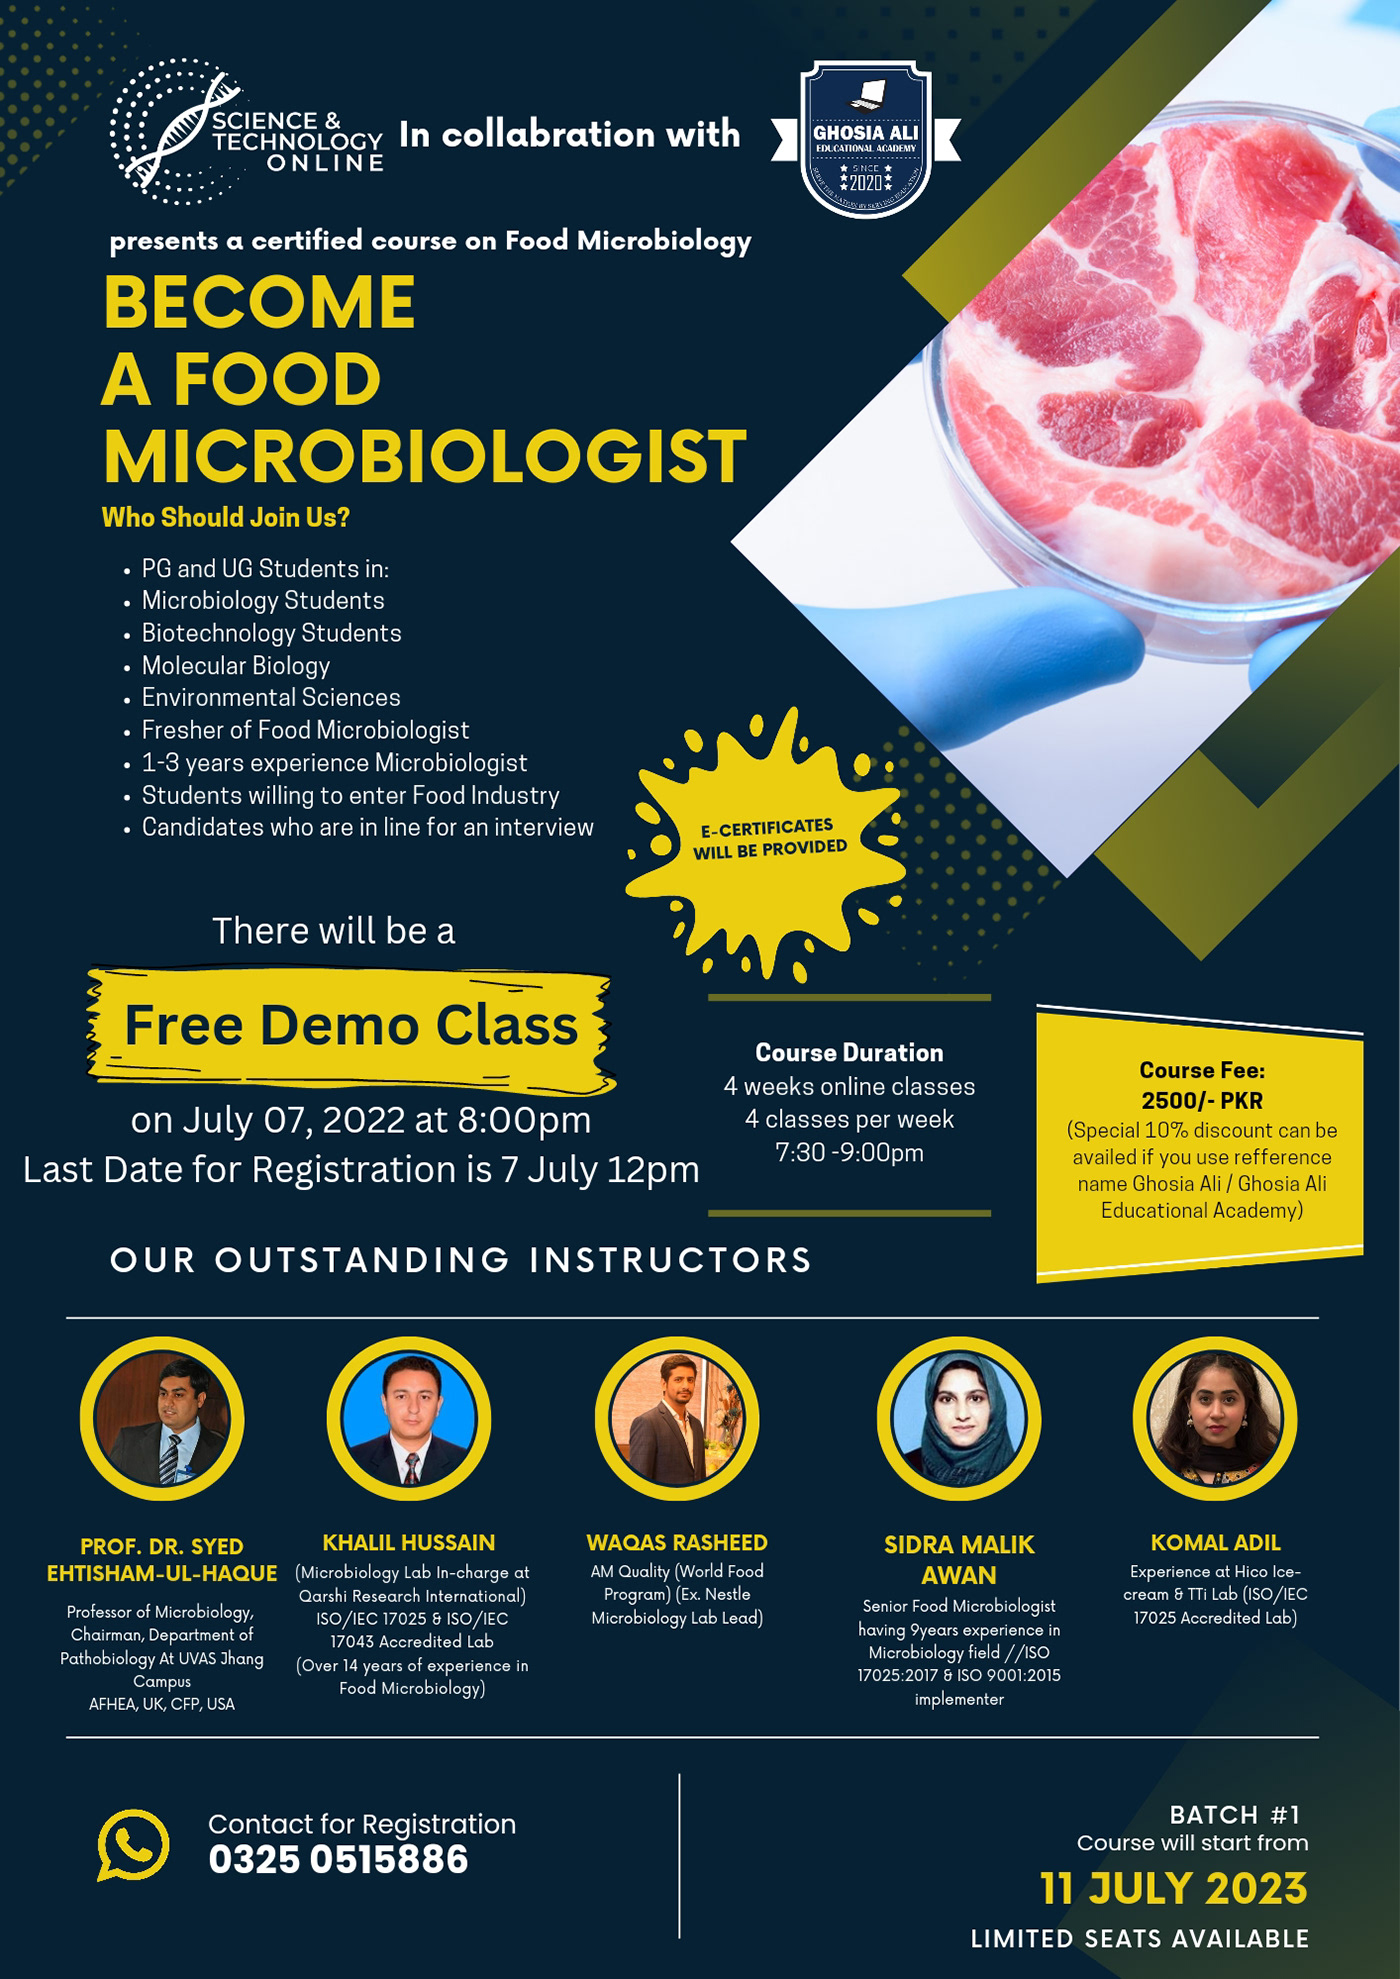 eCourse onlinecourse tesing biology FOOD INDUSTRY Bio-technology scientists microbiologist microbiology free